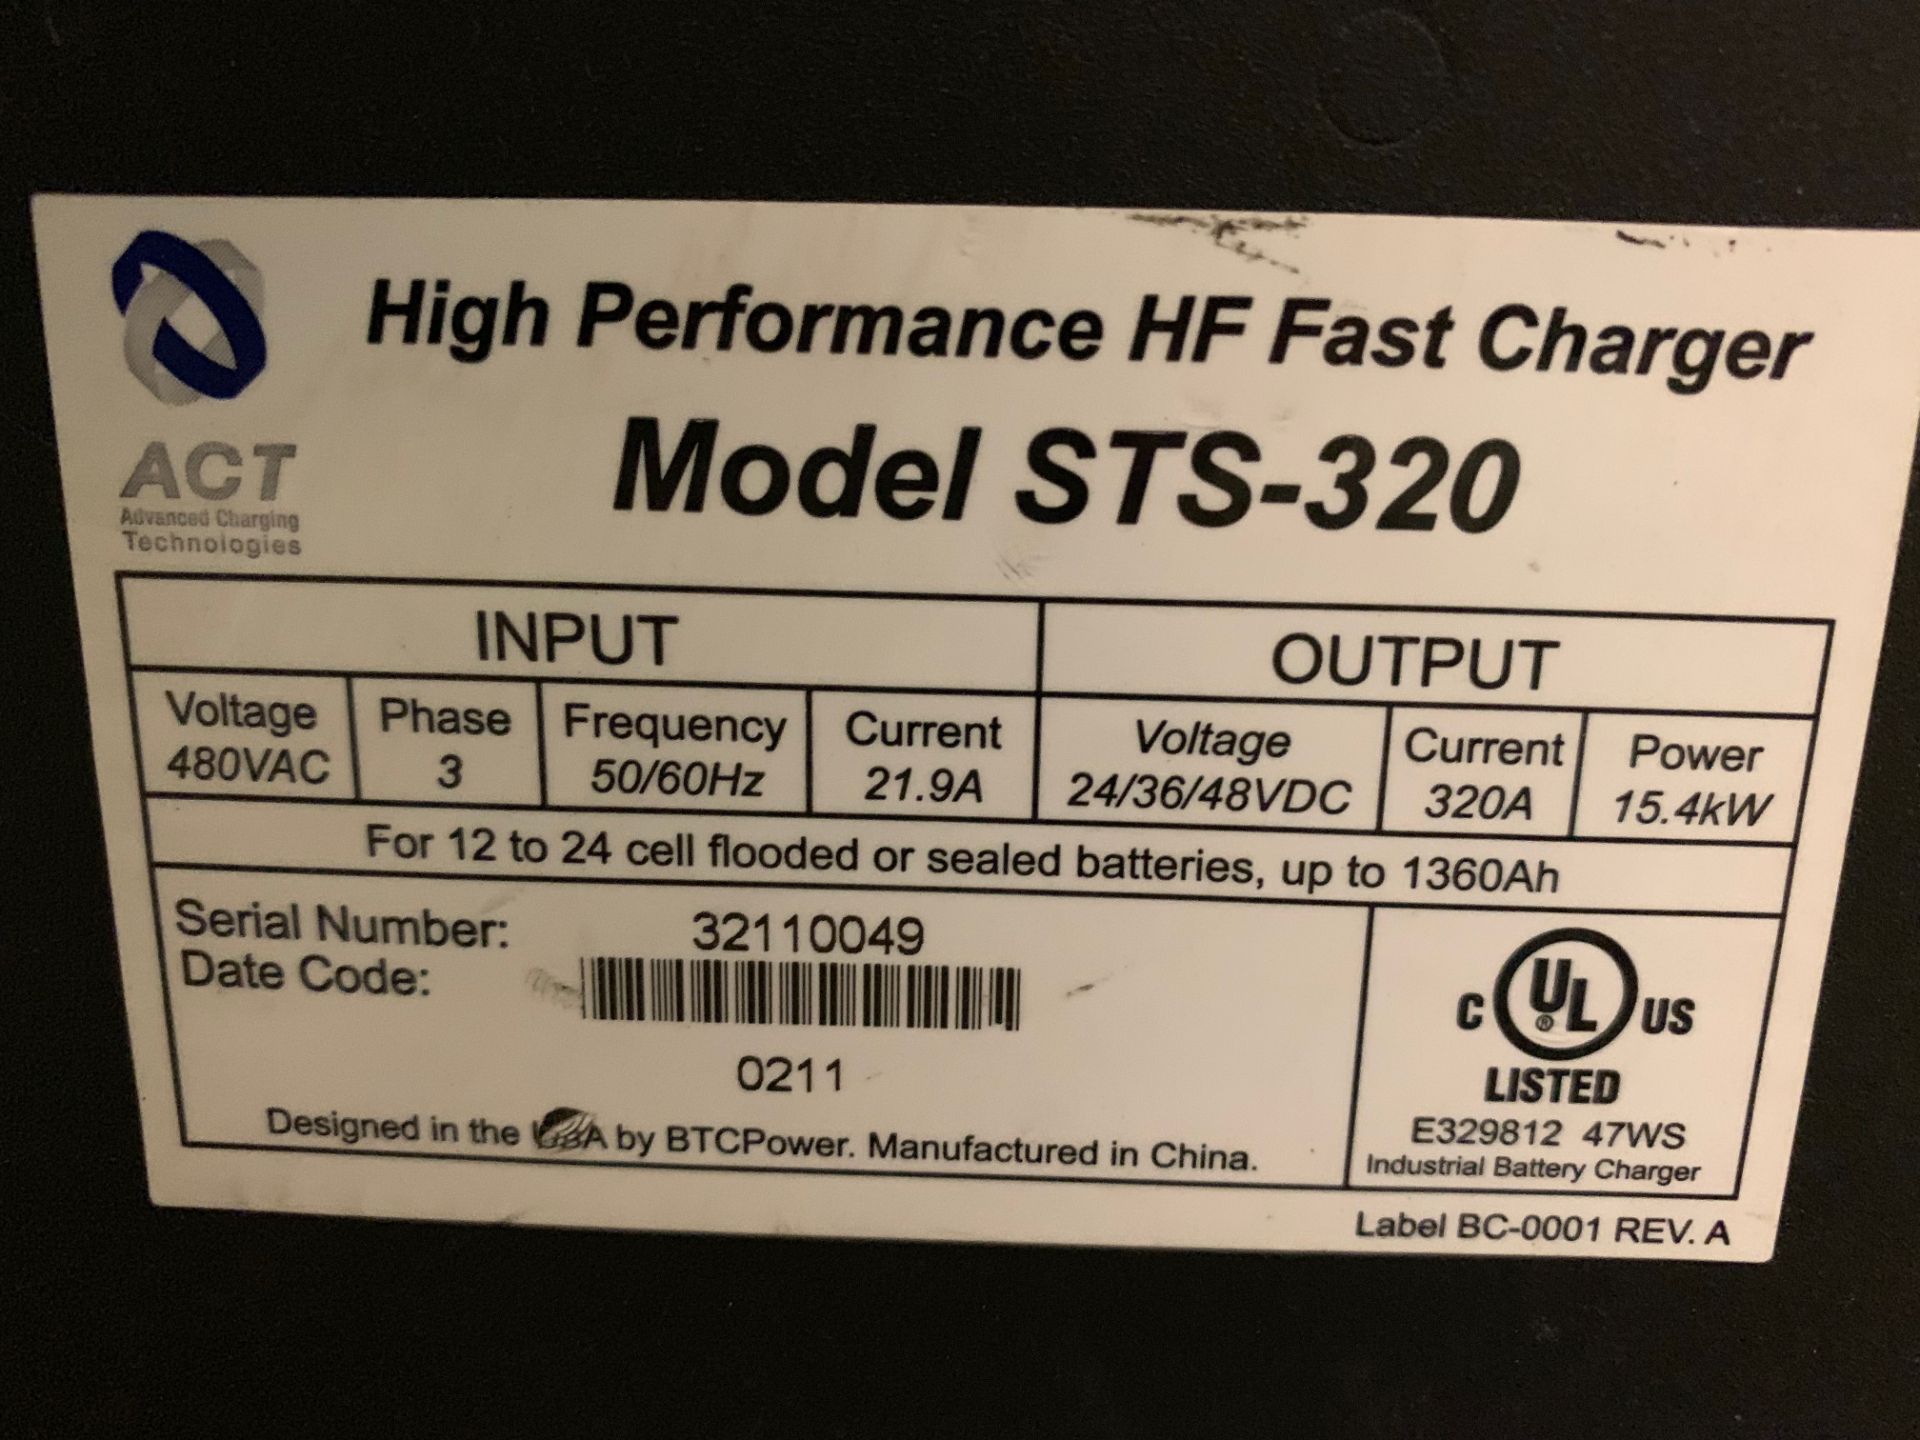 ADVANCED CHARGING TECHNOLOGIES HIGH FREQUENCY MULTI-VOLT FAST CHARGER, MODEL: STS-320, 24/36/48 VOLT - Image 3 of 3